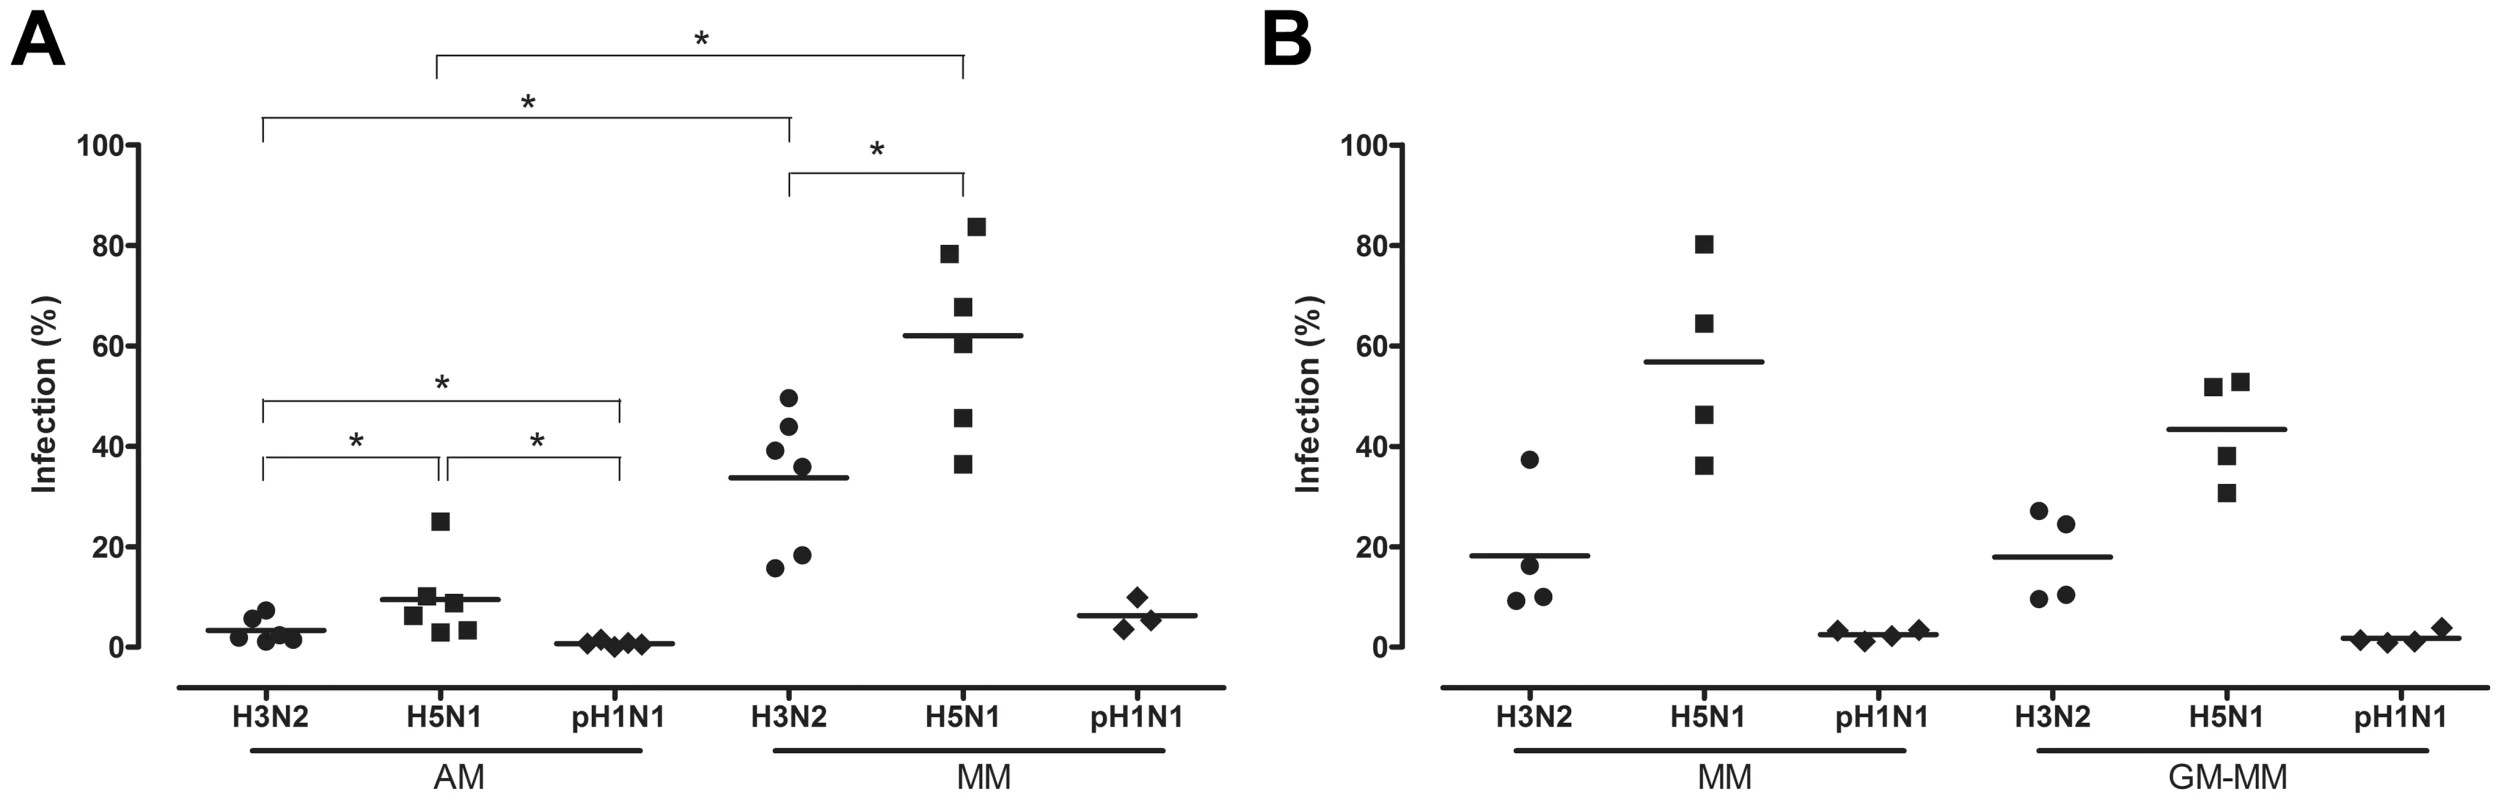 Percentage of alveolar macrophages and monocyte-derived macrophages infected with H3N2, H5N1 or H1N1 virus.